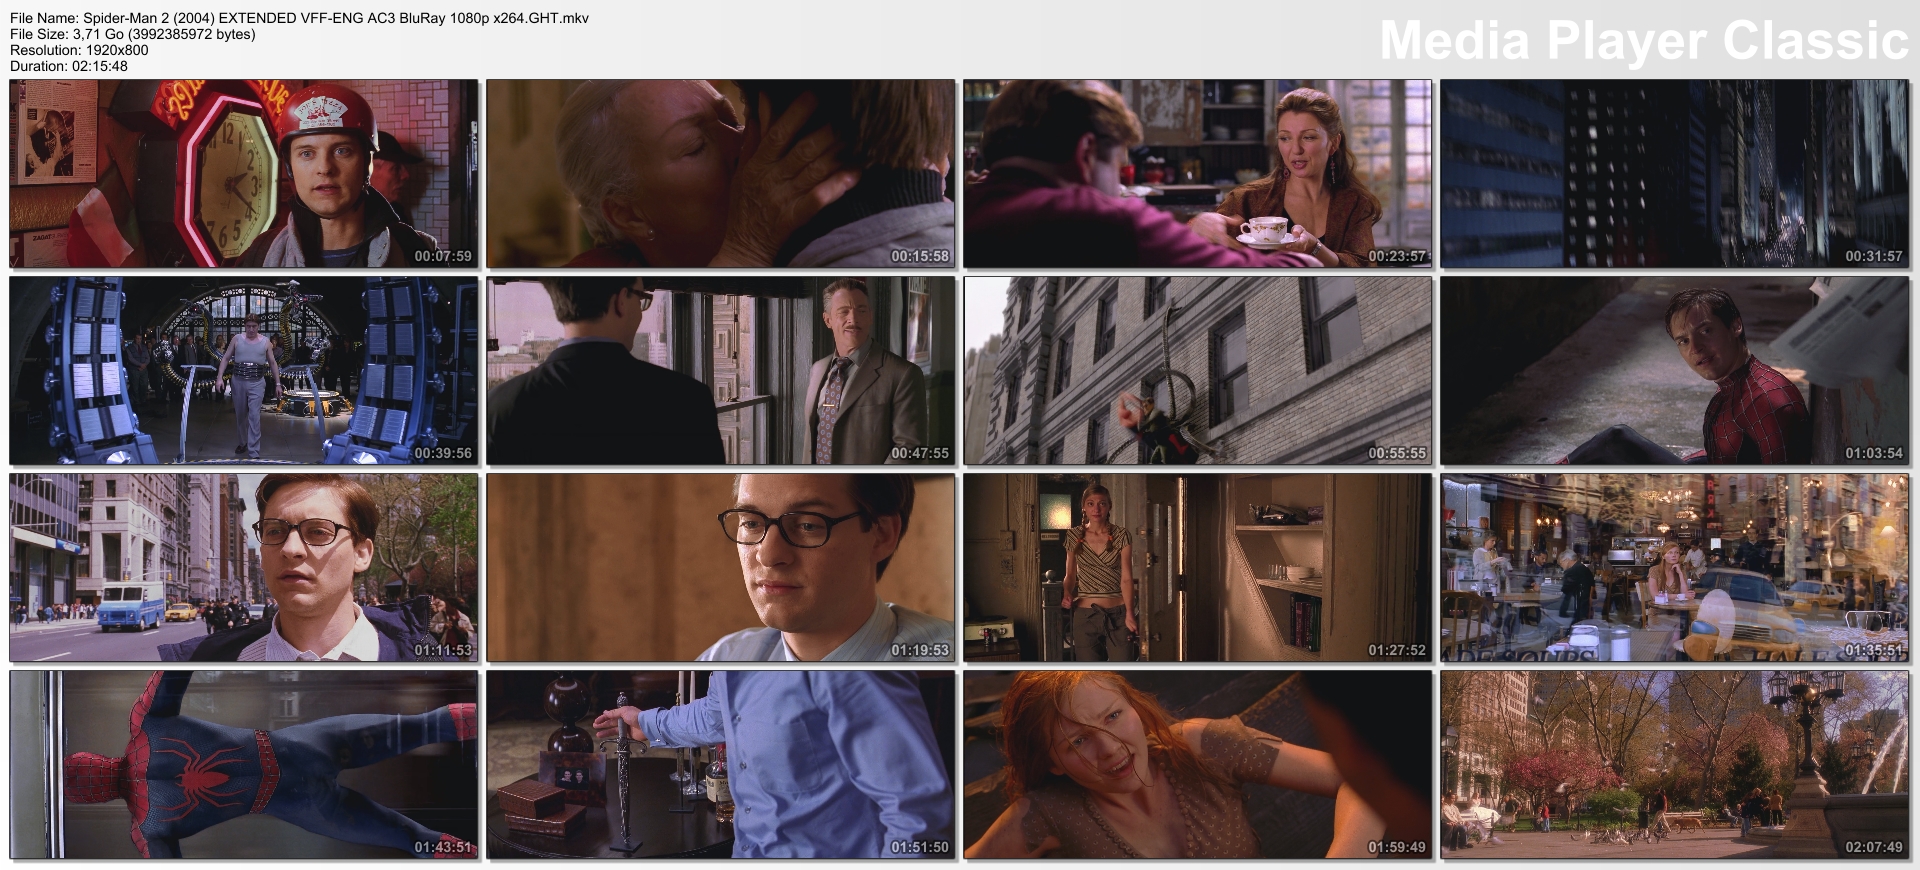 Spider-Man 2 (2004) EXTENDED VFF-ENG AC3 BluRay 1080p x264